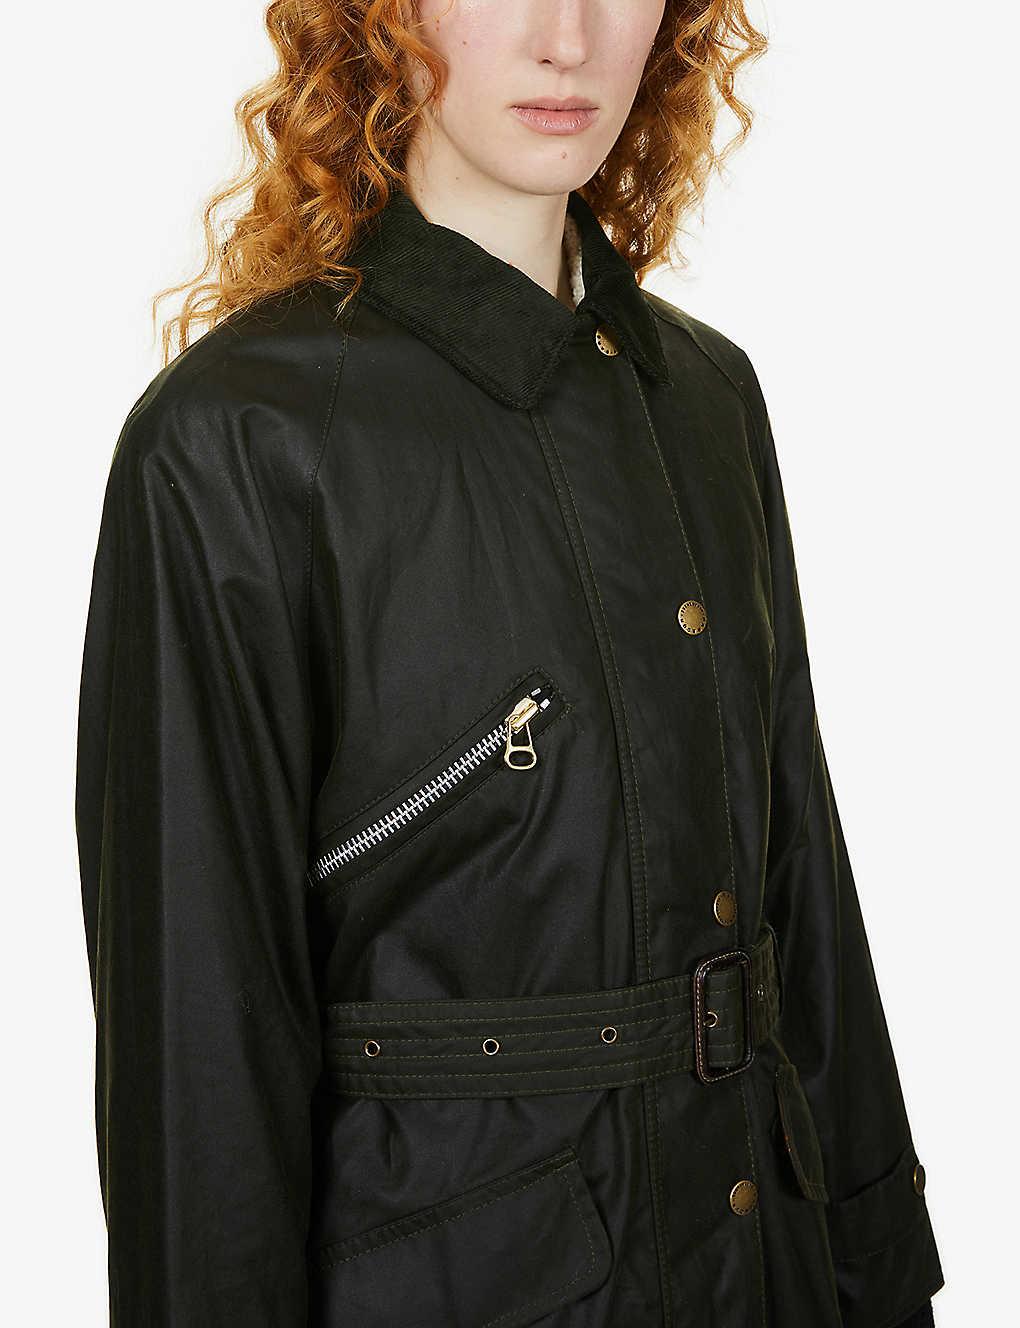 Barbour X Alexa Chung Edna Waxed-cotton Coat in Black | Lyst